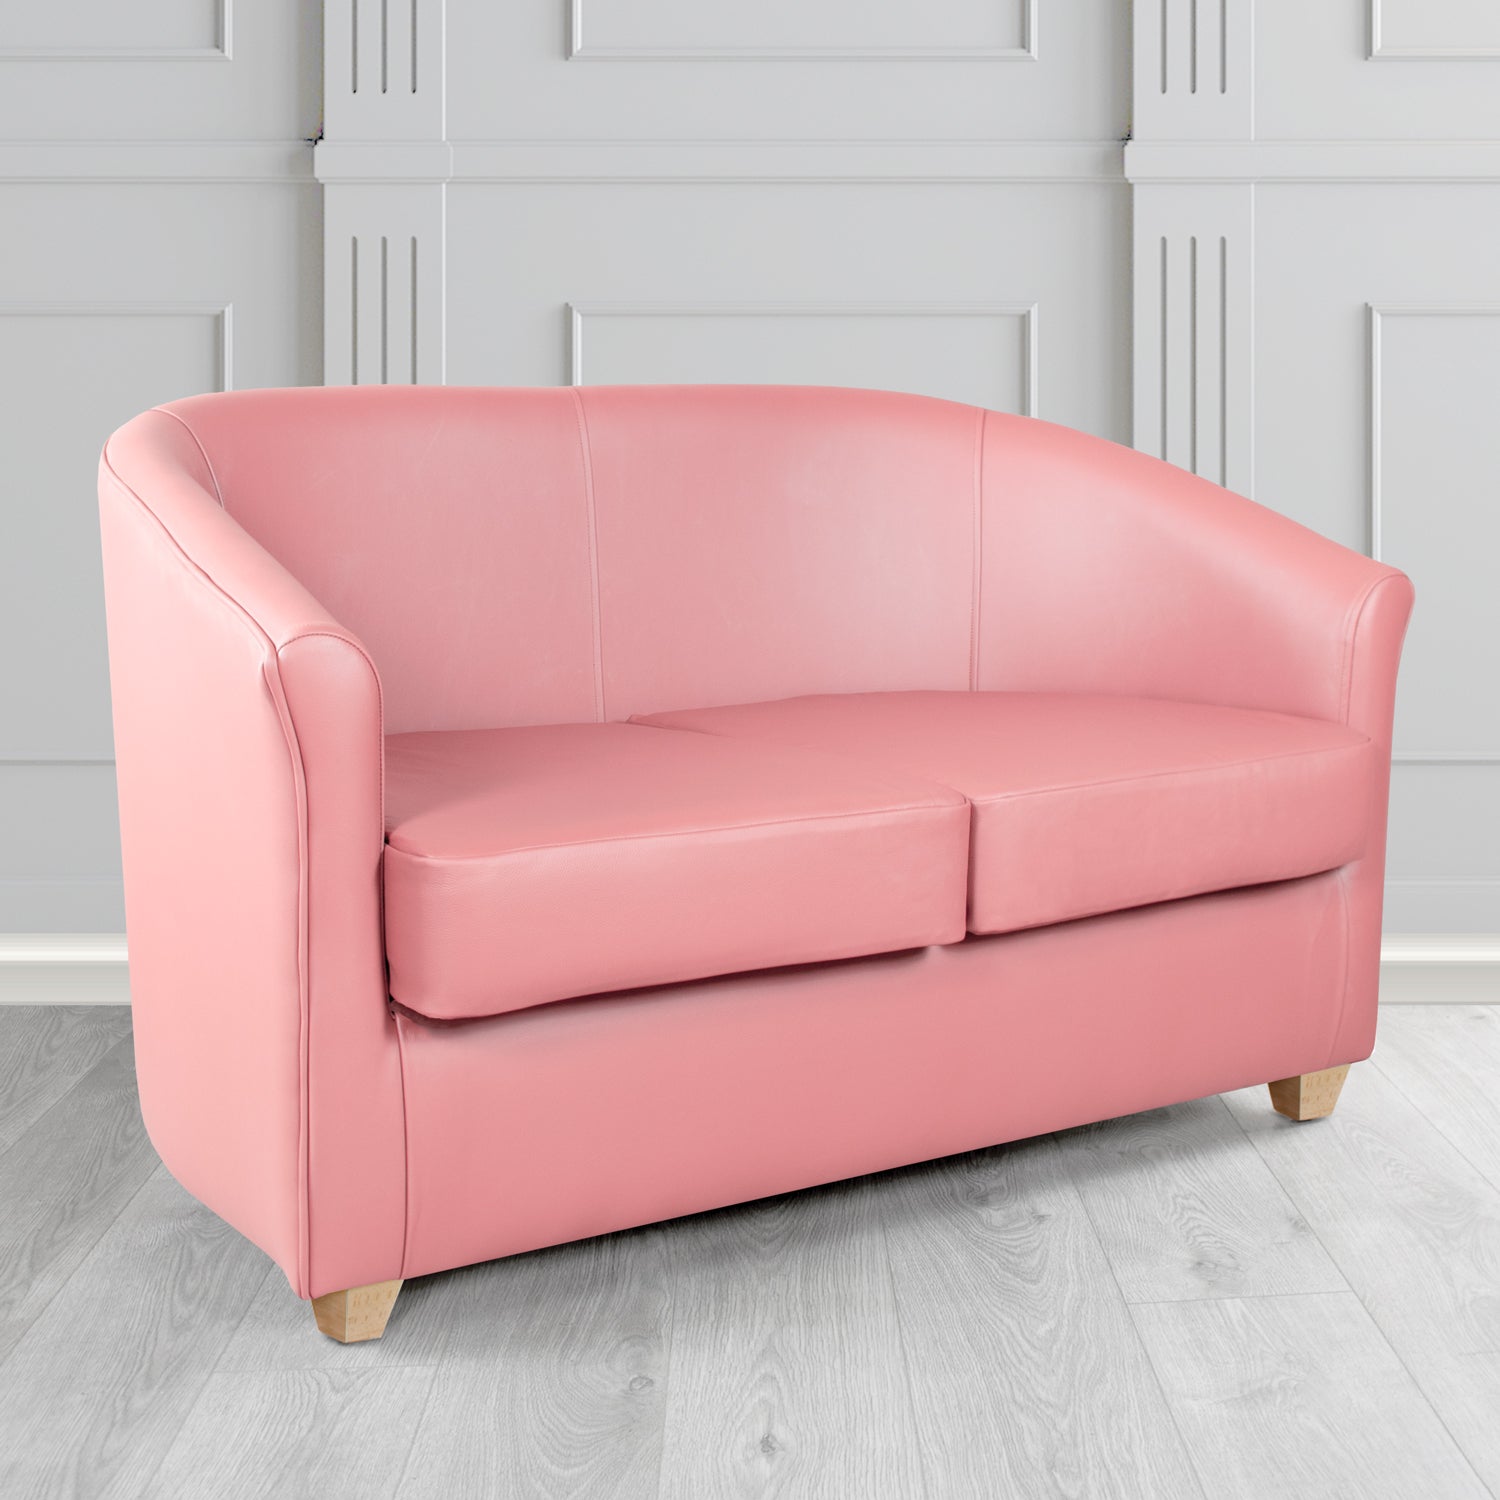 Cannes 2 Seater Tub Sofa in Just Colour Cherry Blossom Crib 5 Faux Leather - The Tub Chair Shop